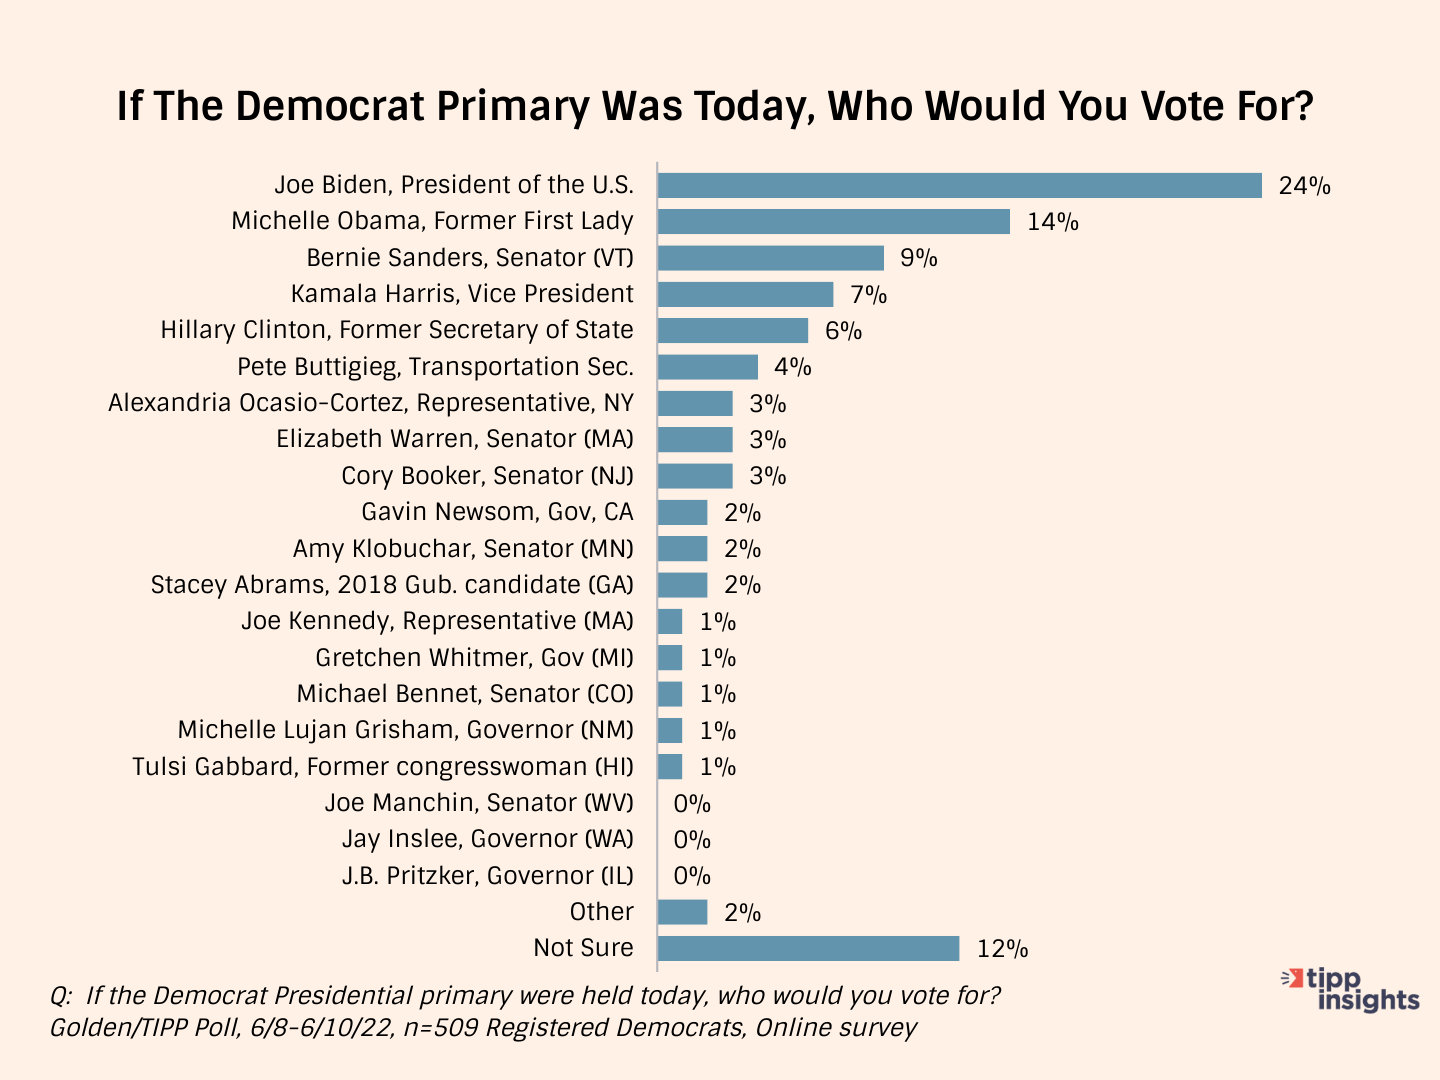 Golden/TIPP Poll Results: If the Democrat Primary was today, who would Democrats (registered) vote for?